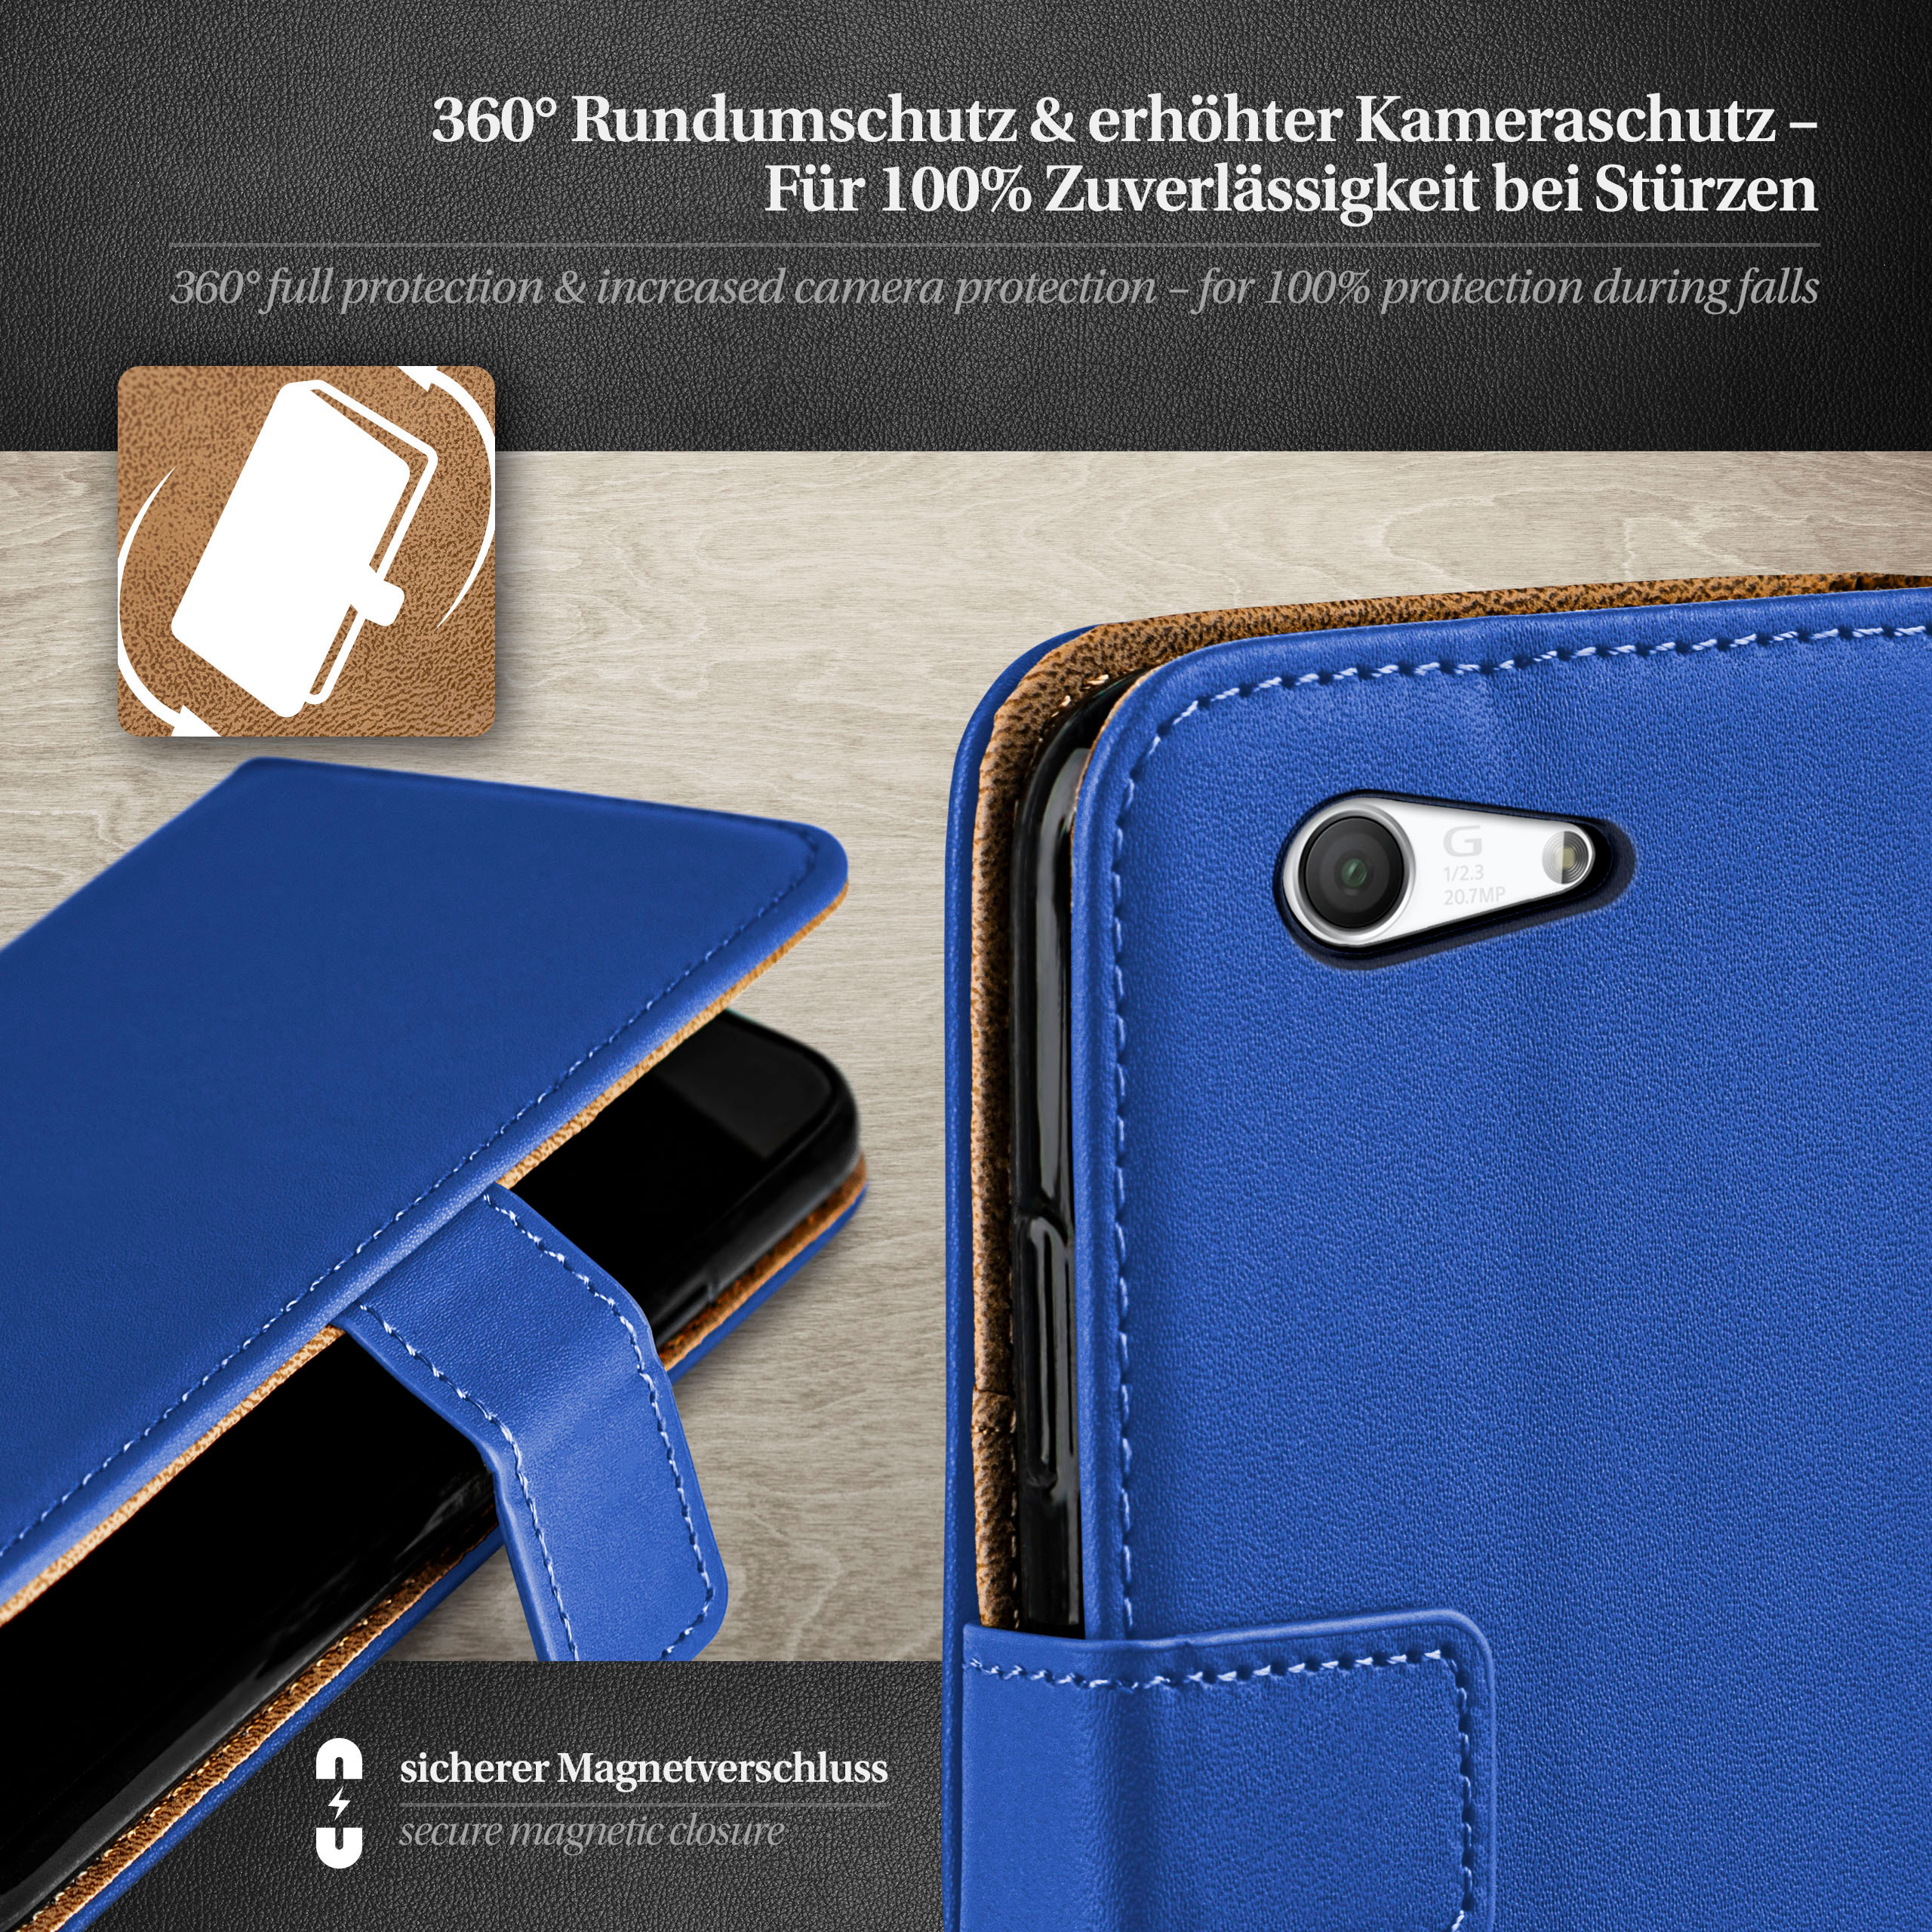 MOEX Book Compact, Sony, Xperia Case, Z3 Bookcover, Royal-Blue